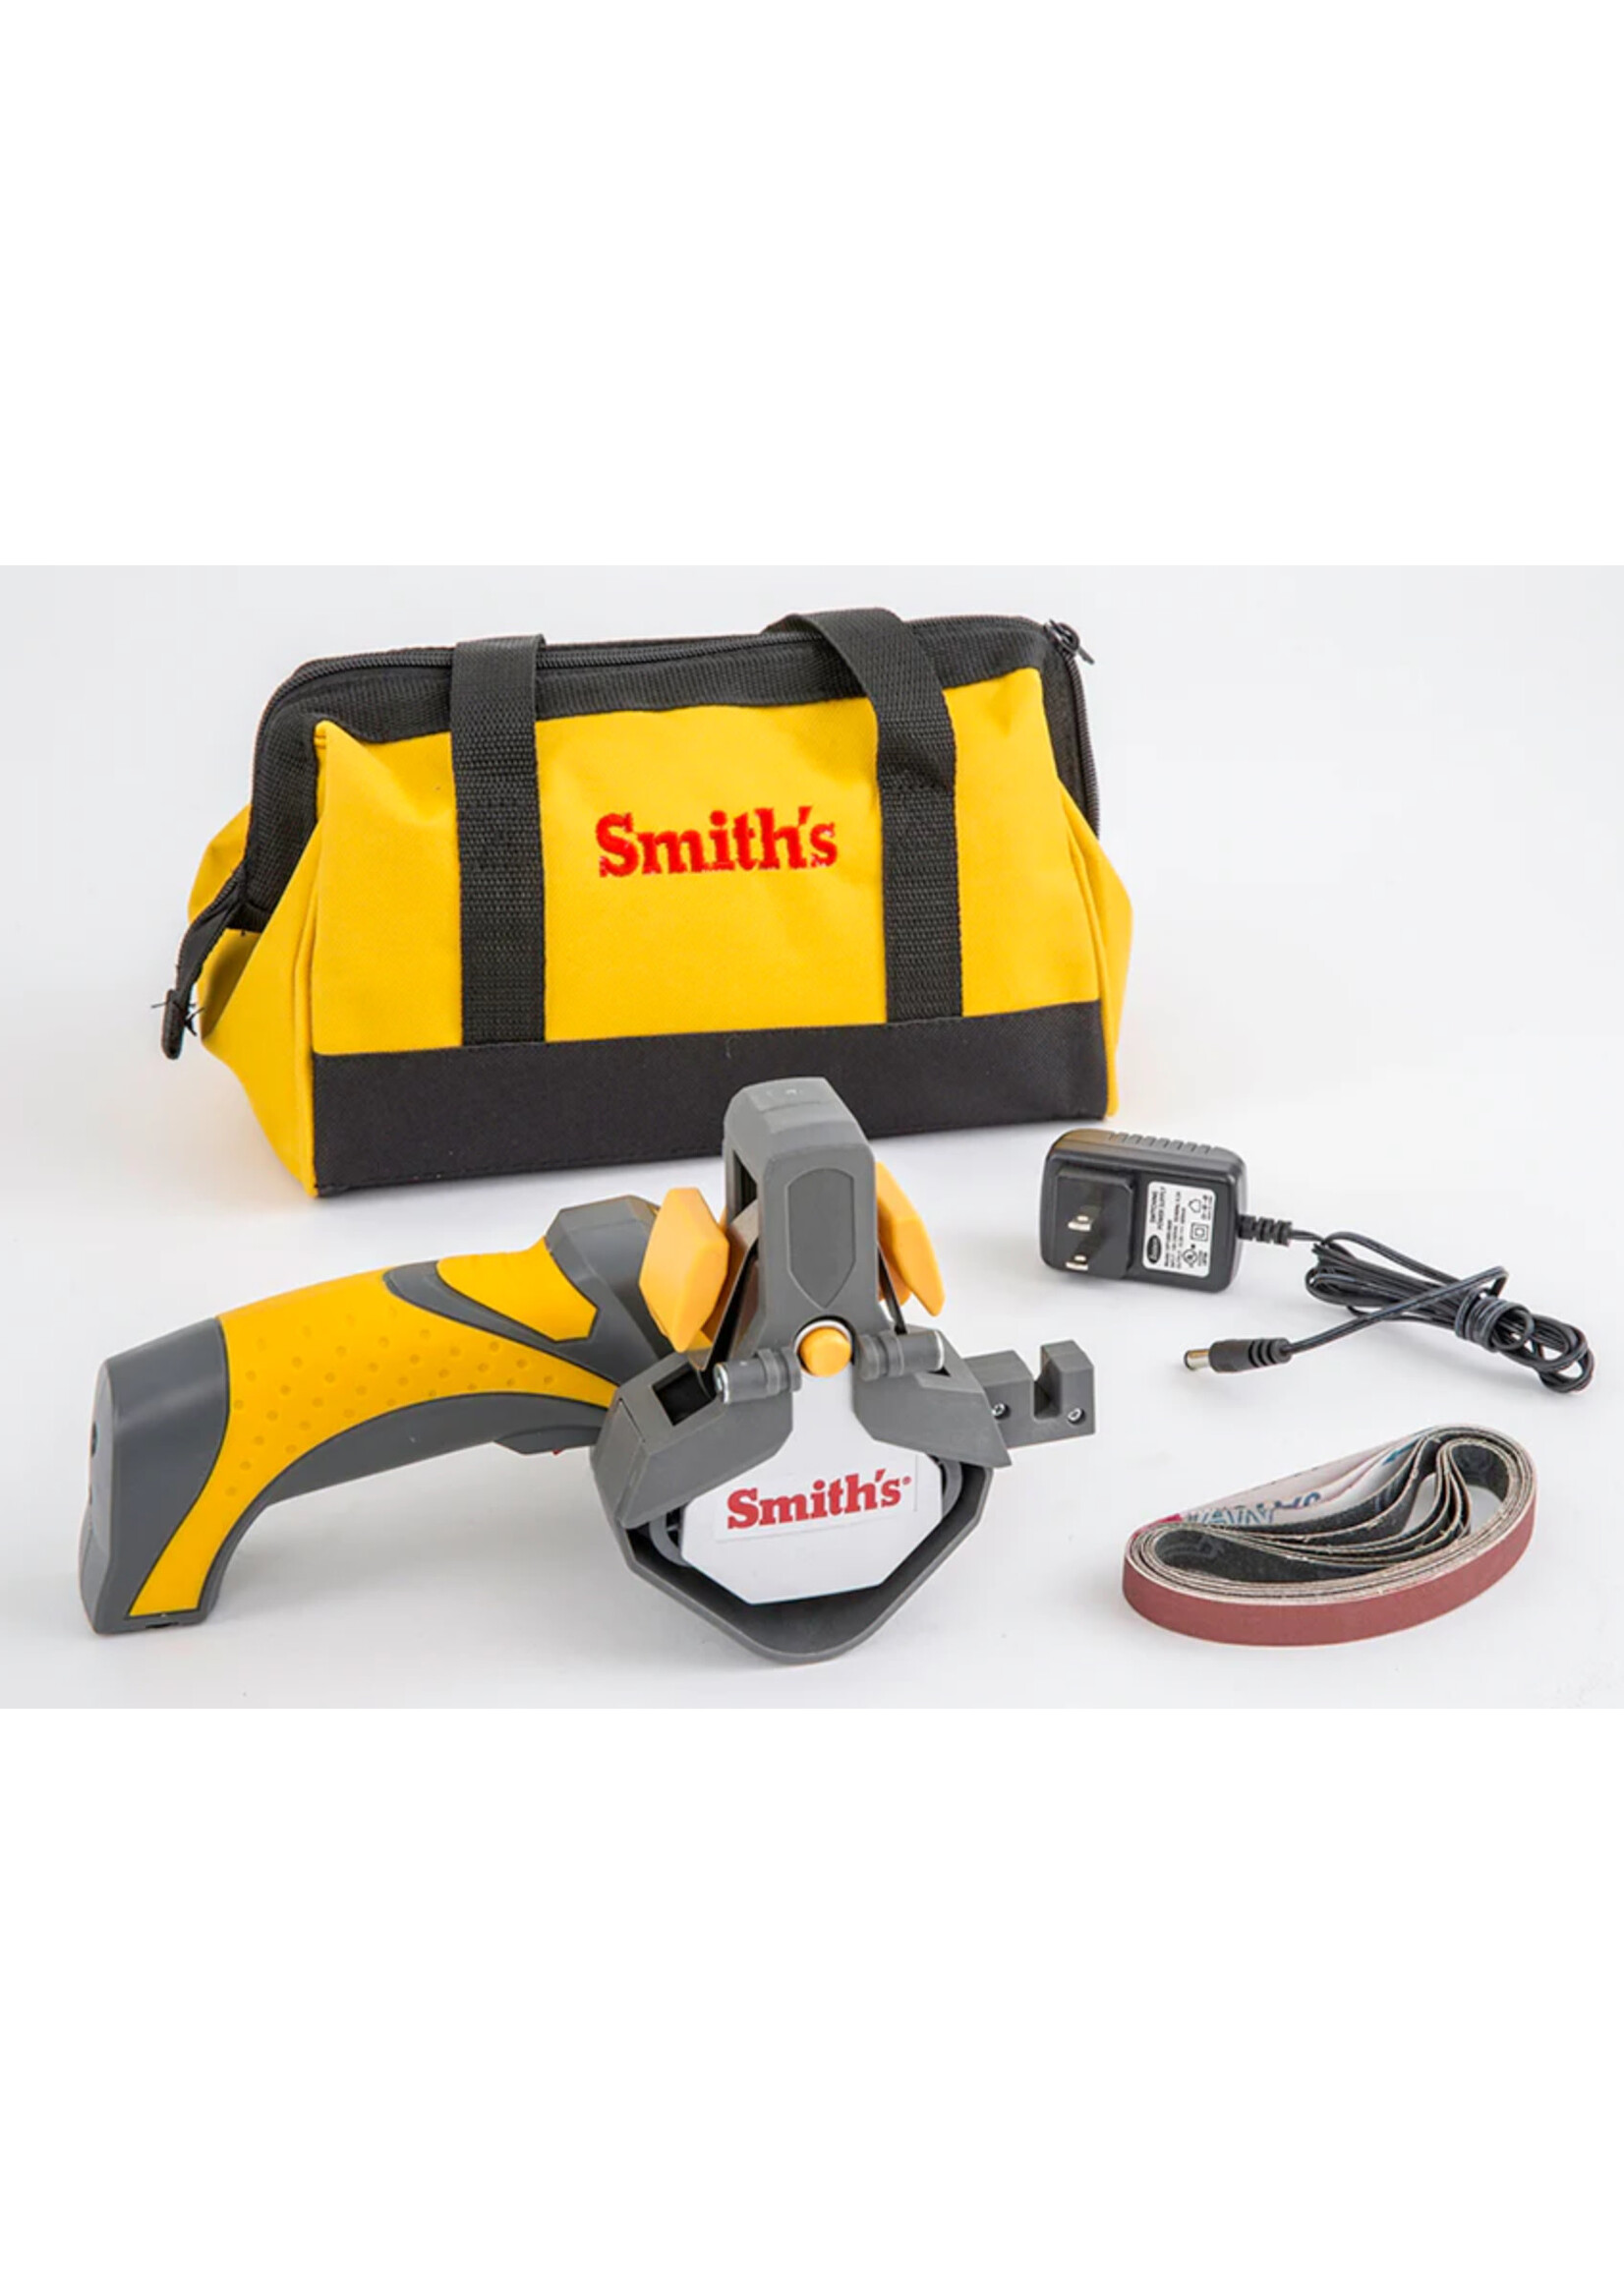 SMITH’S CORDLESS KNIFE & TOOL SHARPENER KIT W/TOOL BAG & ACCESSORY BELTS